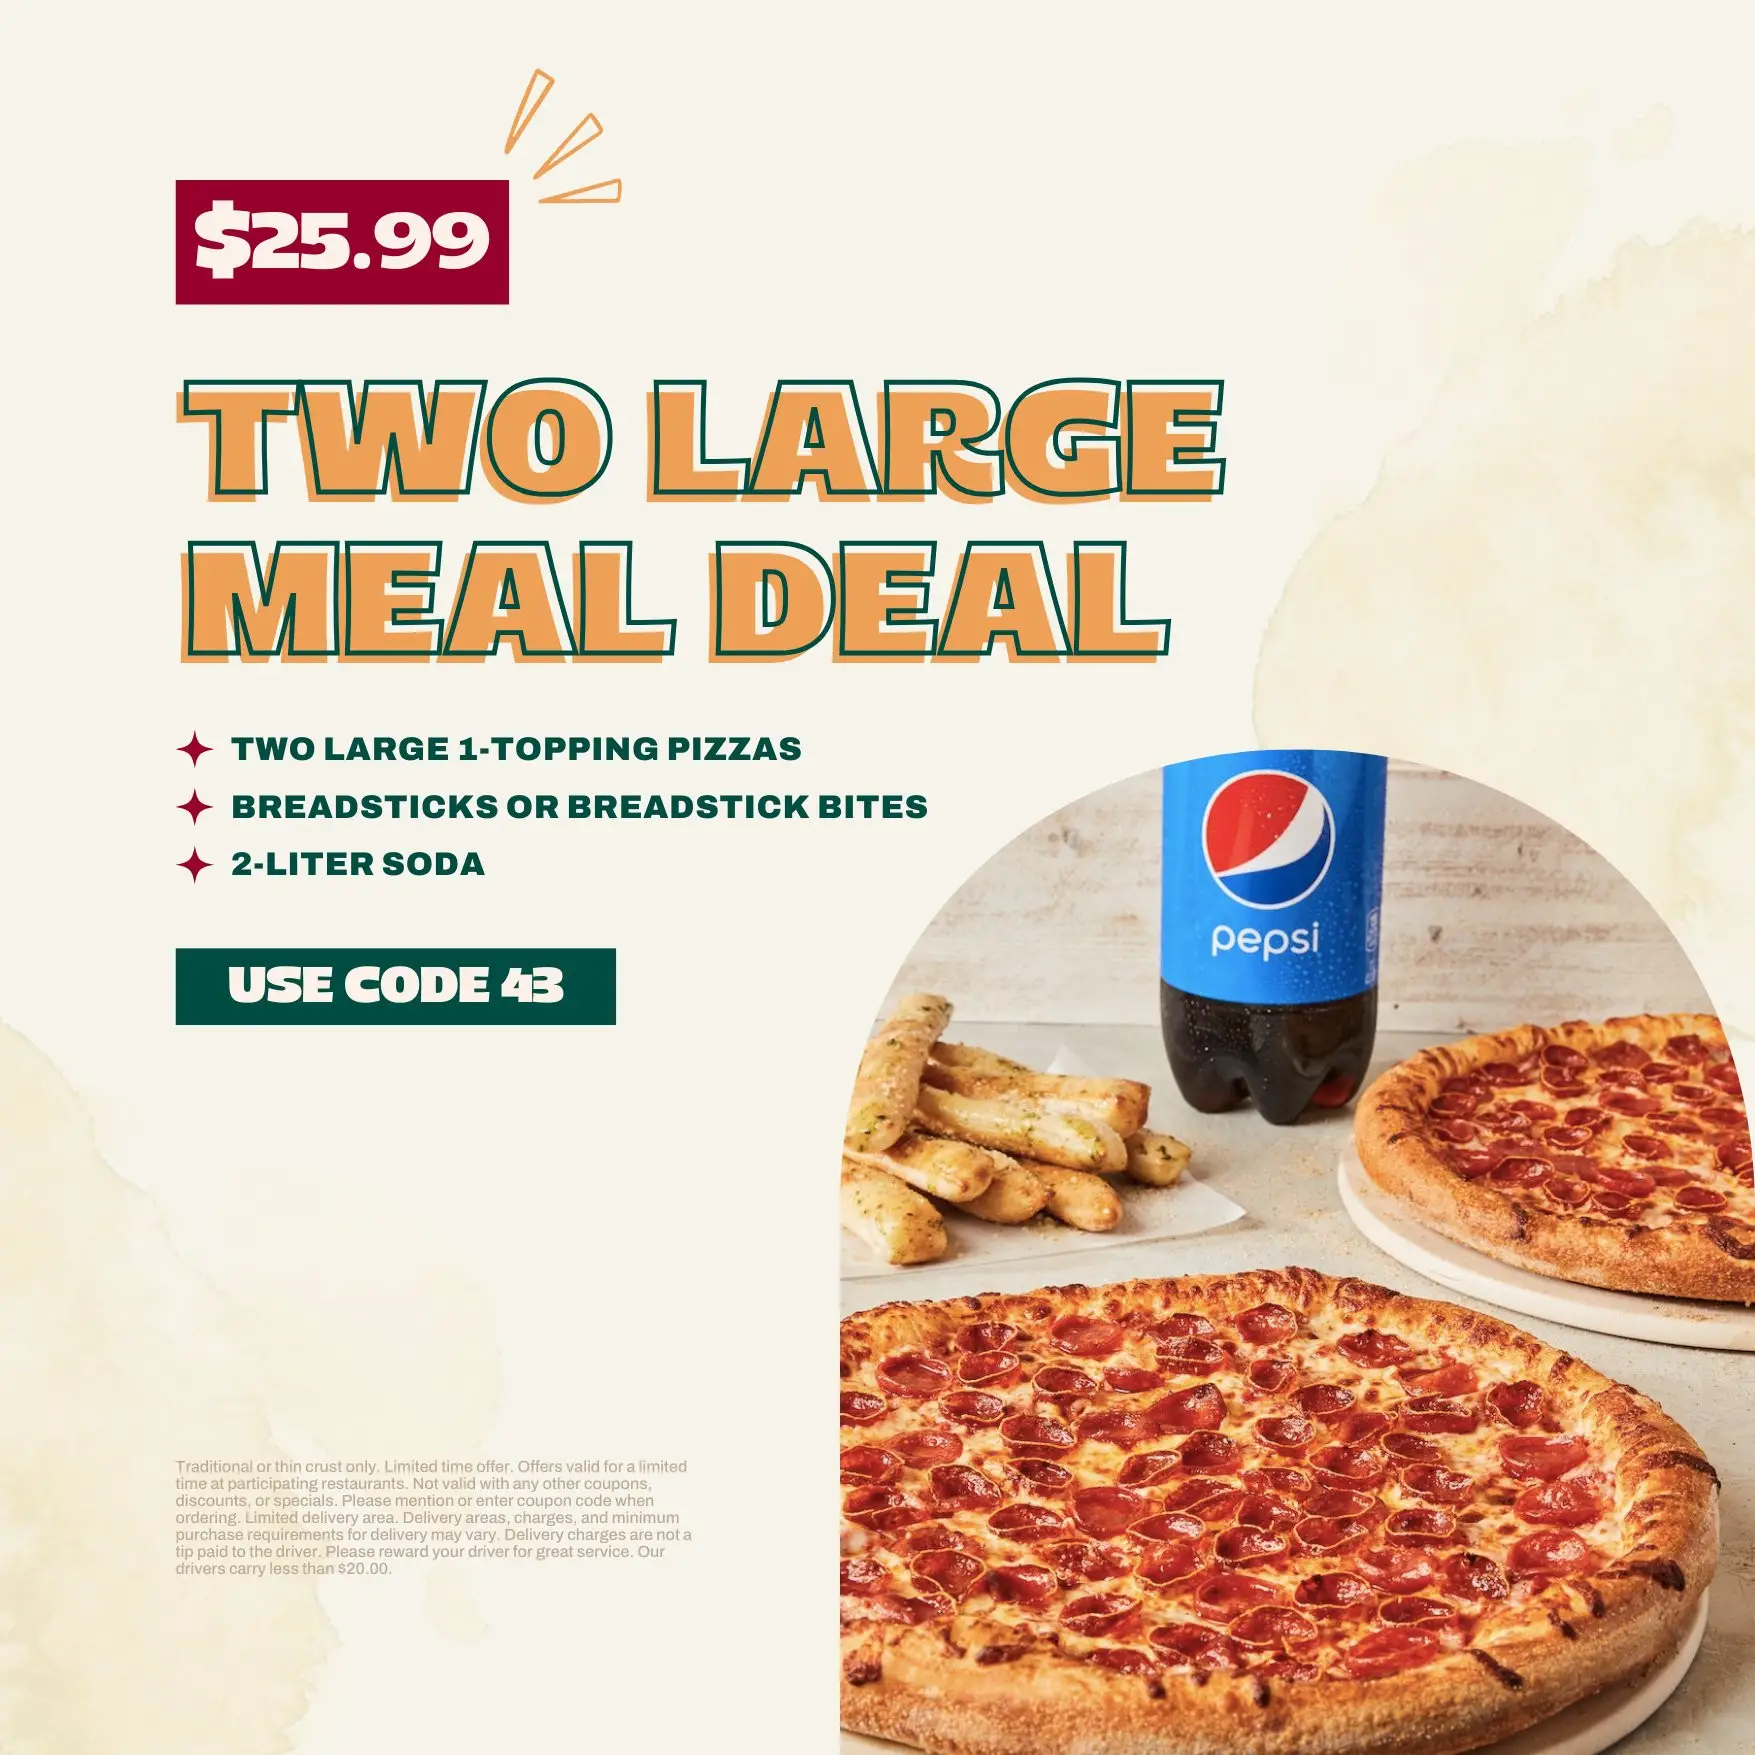 Vocelli Pizza National Pizza Week 2 Large 1-Topping Pizzas, Breadstick Bites, 2-Liter Soda for Only $25.99